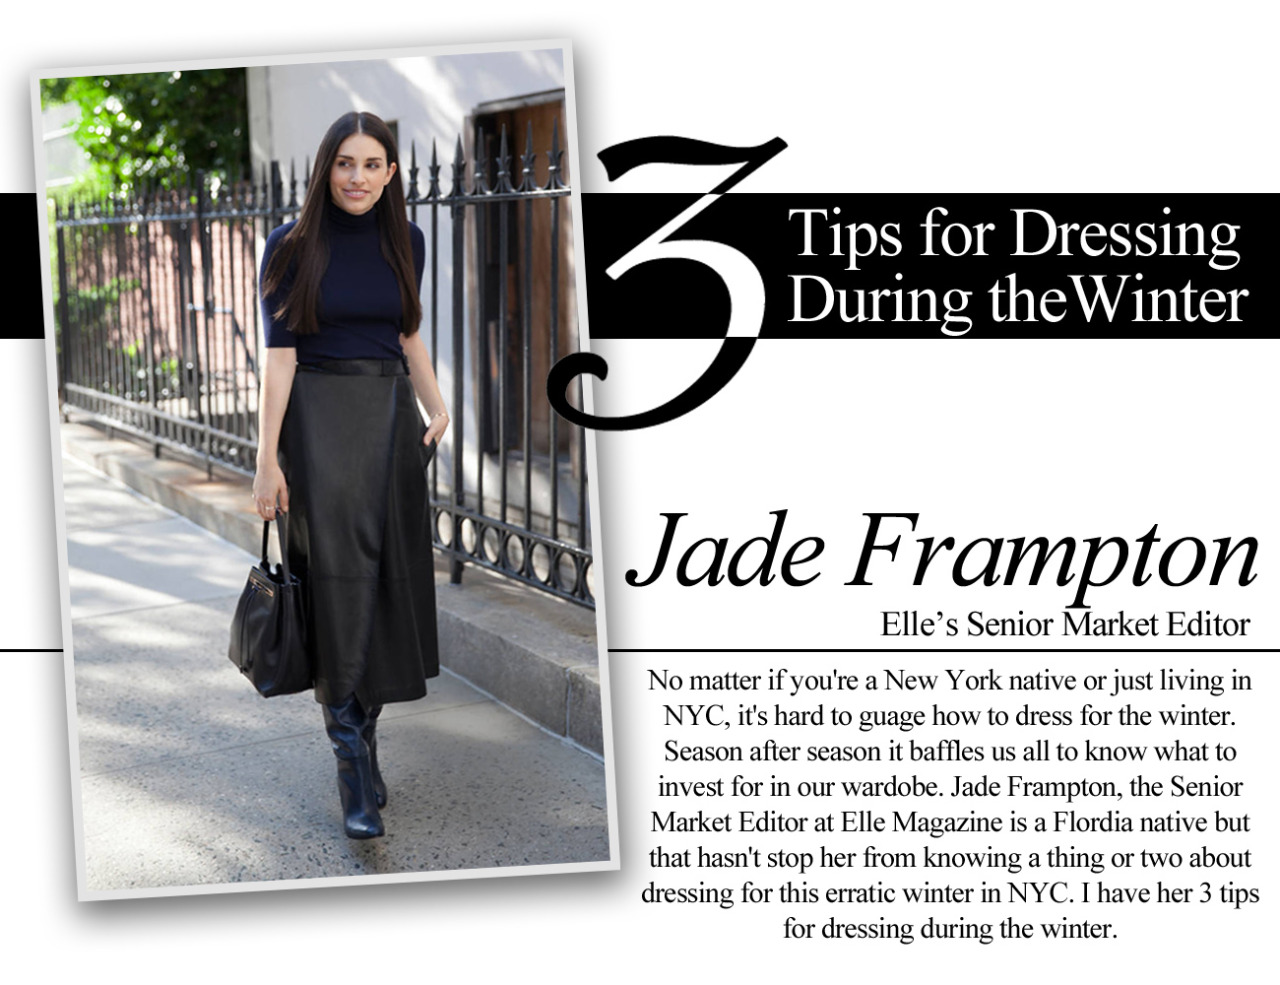 No matter if you're a New York native or just living in NYC, it's hard to guage how to dress for the winter. Season after season it baffles us all to know what to invest for in our wardobe. Jade Frampton, the Senior Market Editor at Elle Magazine is a Flordia native but that hasn't stop her from knowing a thing or two about dressing for this erratic winter in NYC. I have her 3 tips for dressing during the winter.